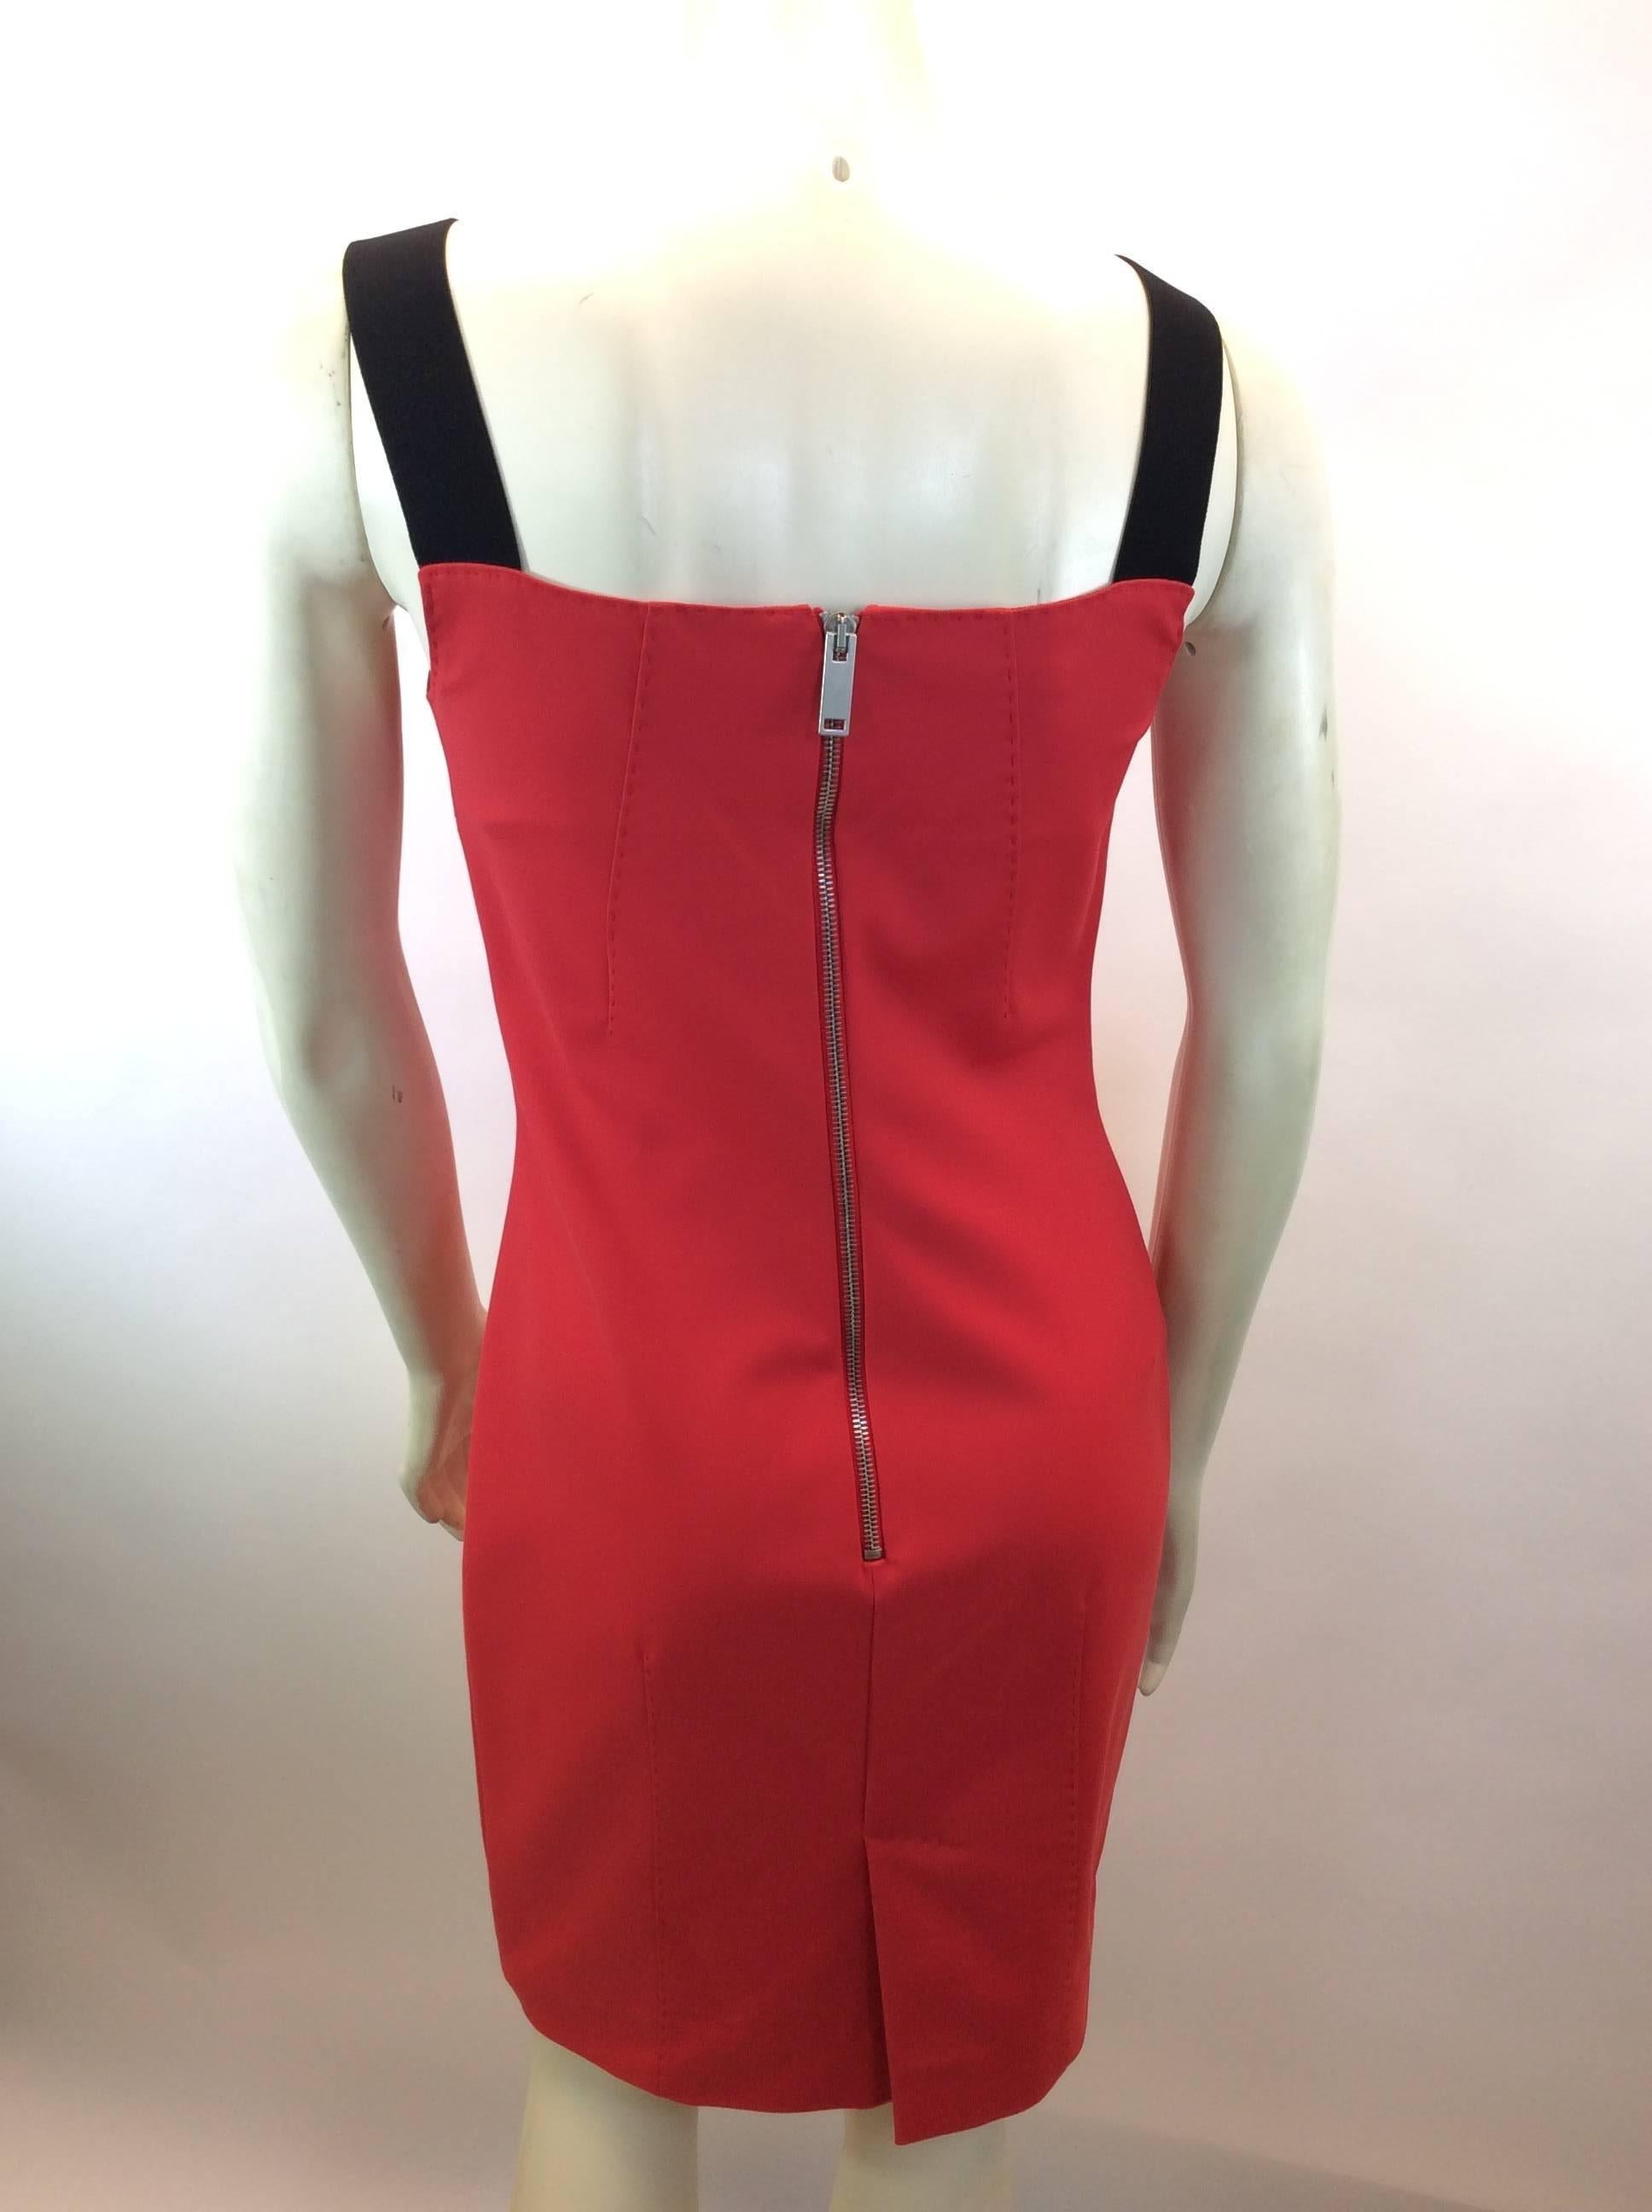 Les Copains Red Dress In Excellent Condition For Sale In Narberth, PA